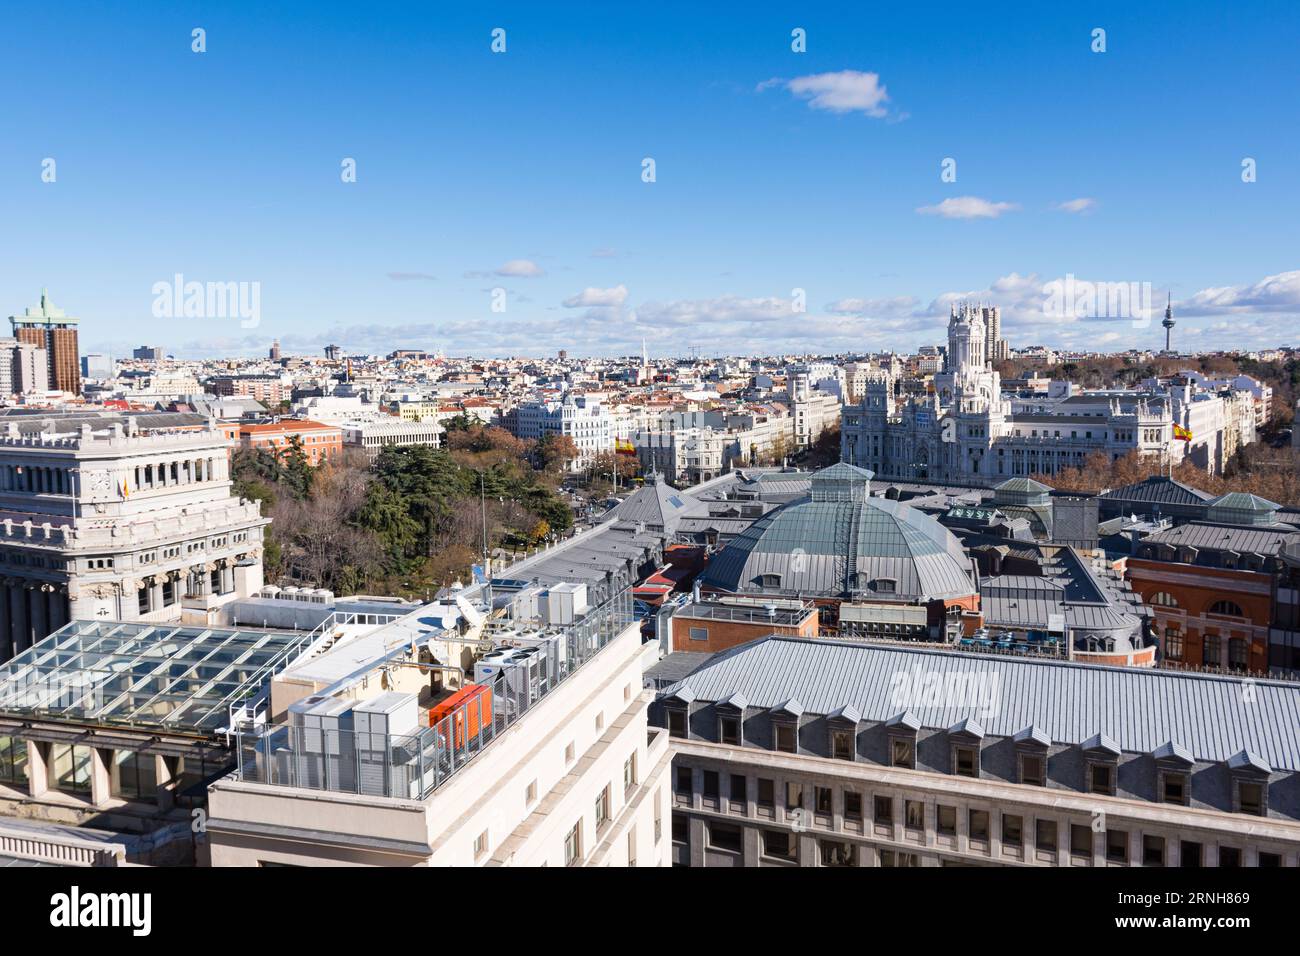 Panoramic view of the city of Madrid, Spain from the rooftop of the Circulo de Bellas Artes building. Stock Photo